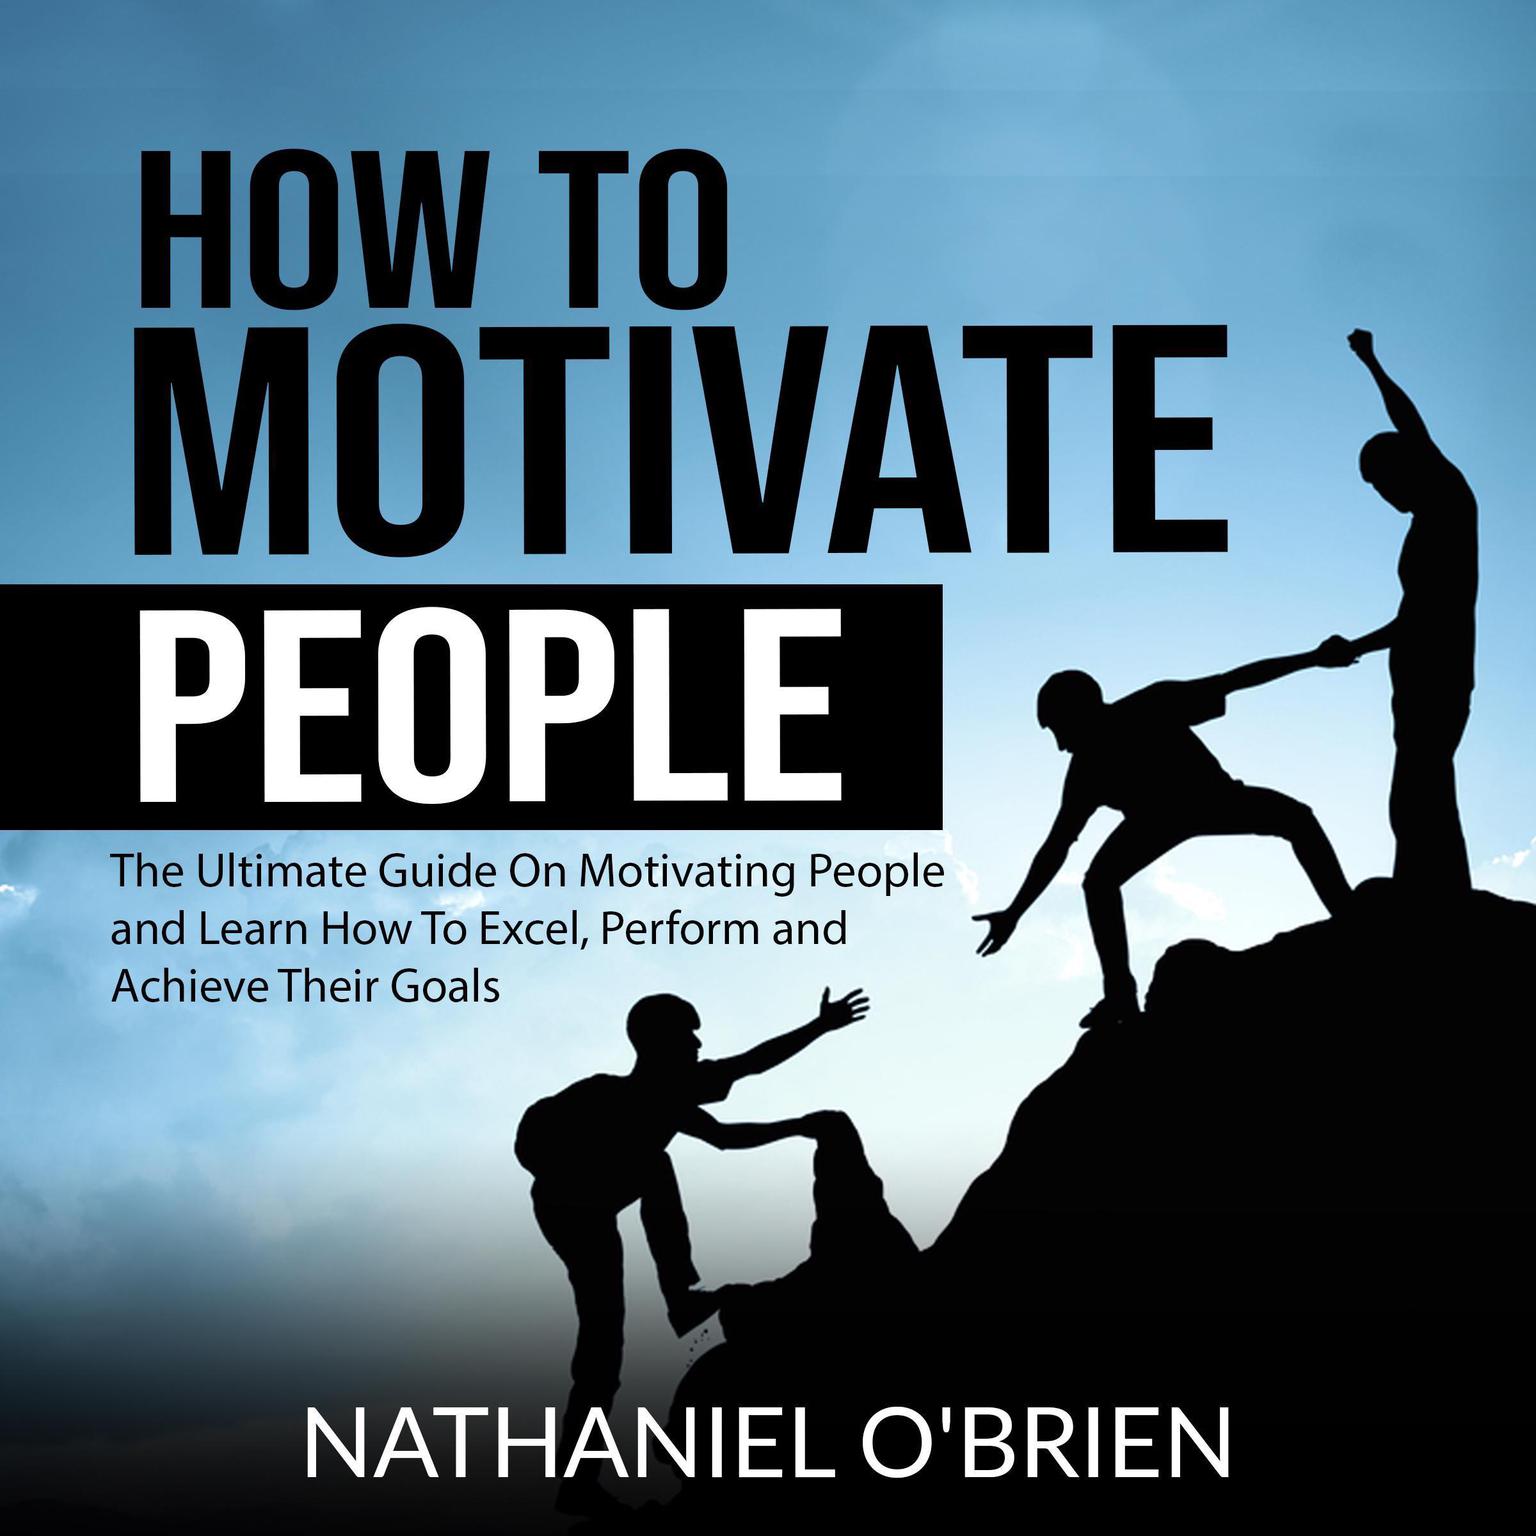 How to Motivate People: The Ultimate Guide On Motivating People and Learn How To Excel, Perform and Achieve Their Goals Audiobook, by Nathaniel O’Brien